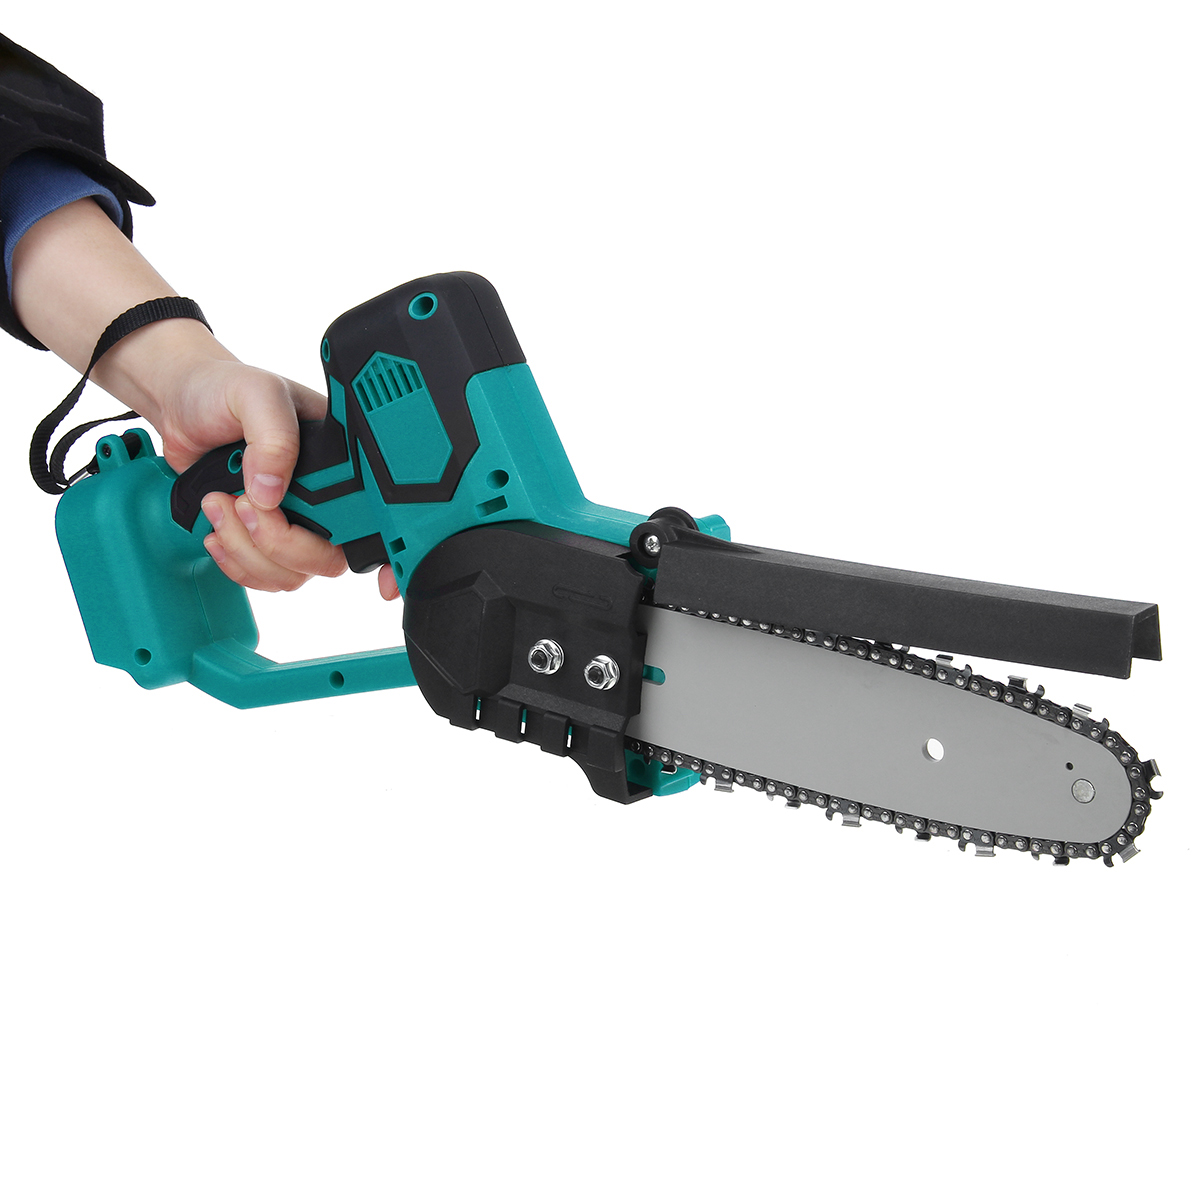 Kiwarm-8-Inch-Cordless-Electric-Chain-Saw-One-Hand-Saw-Woodworking-Cutter-for-Makita-1821V-Battery-1804678-5